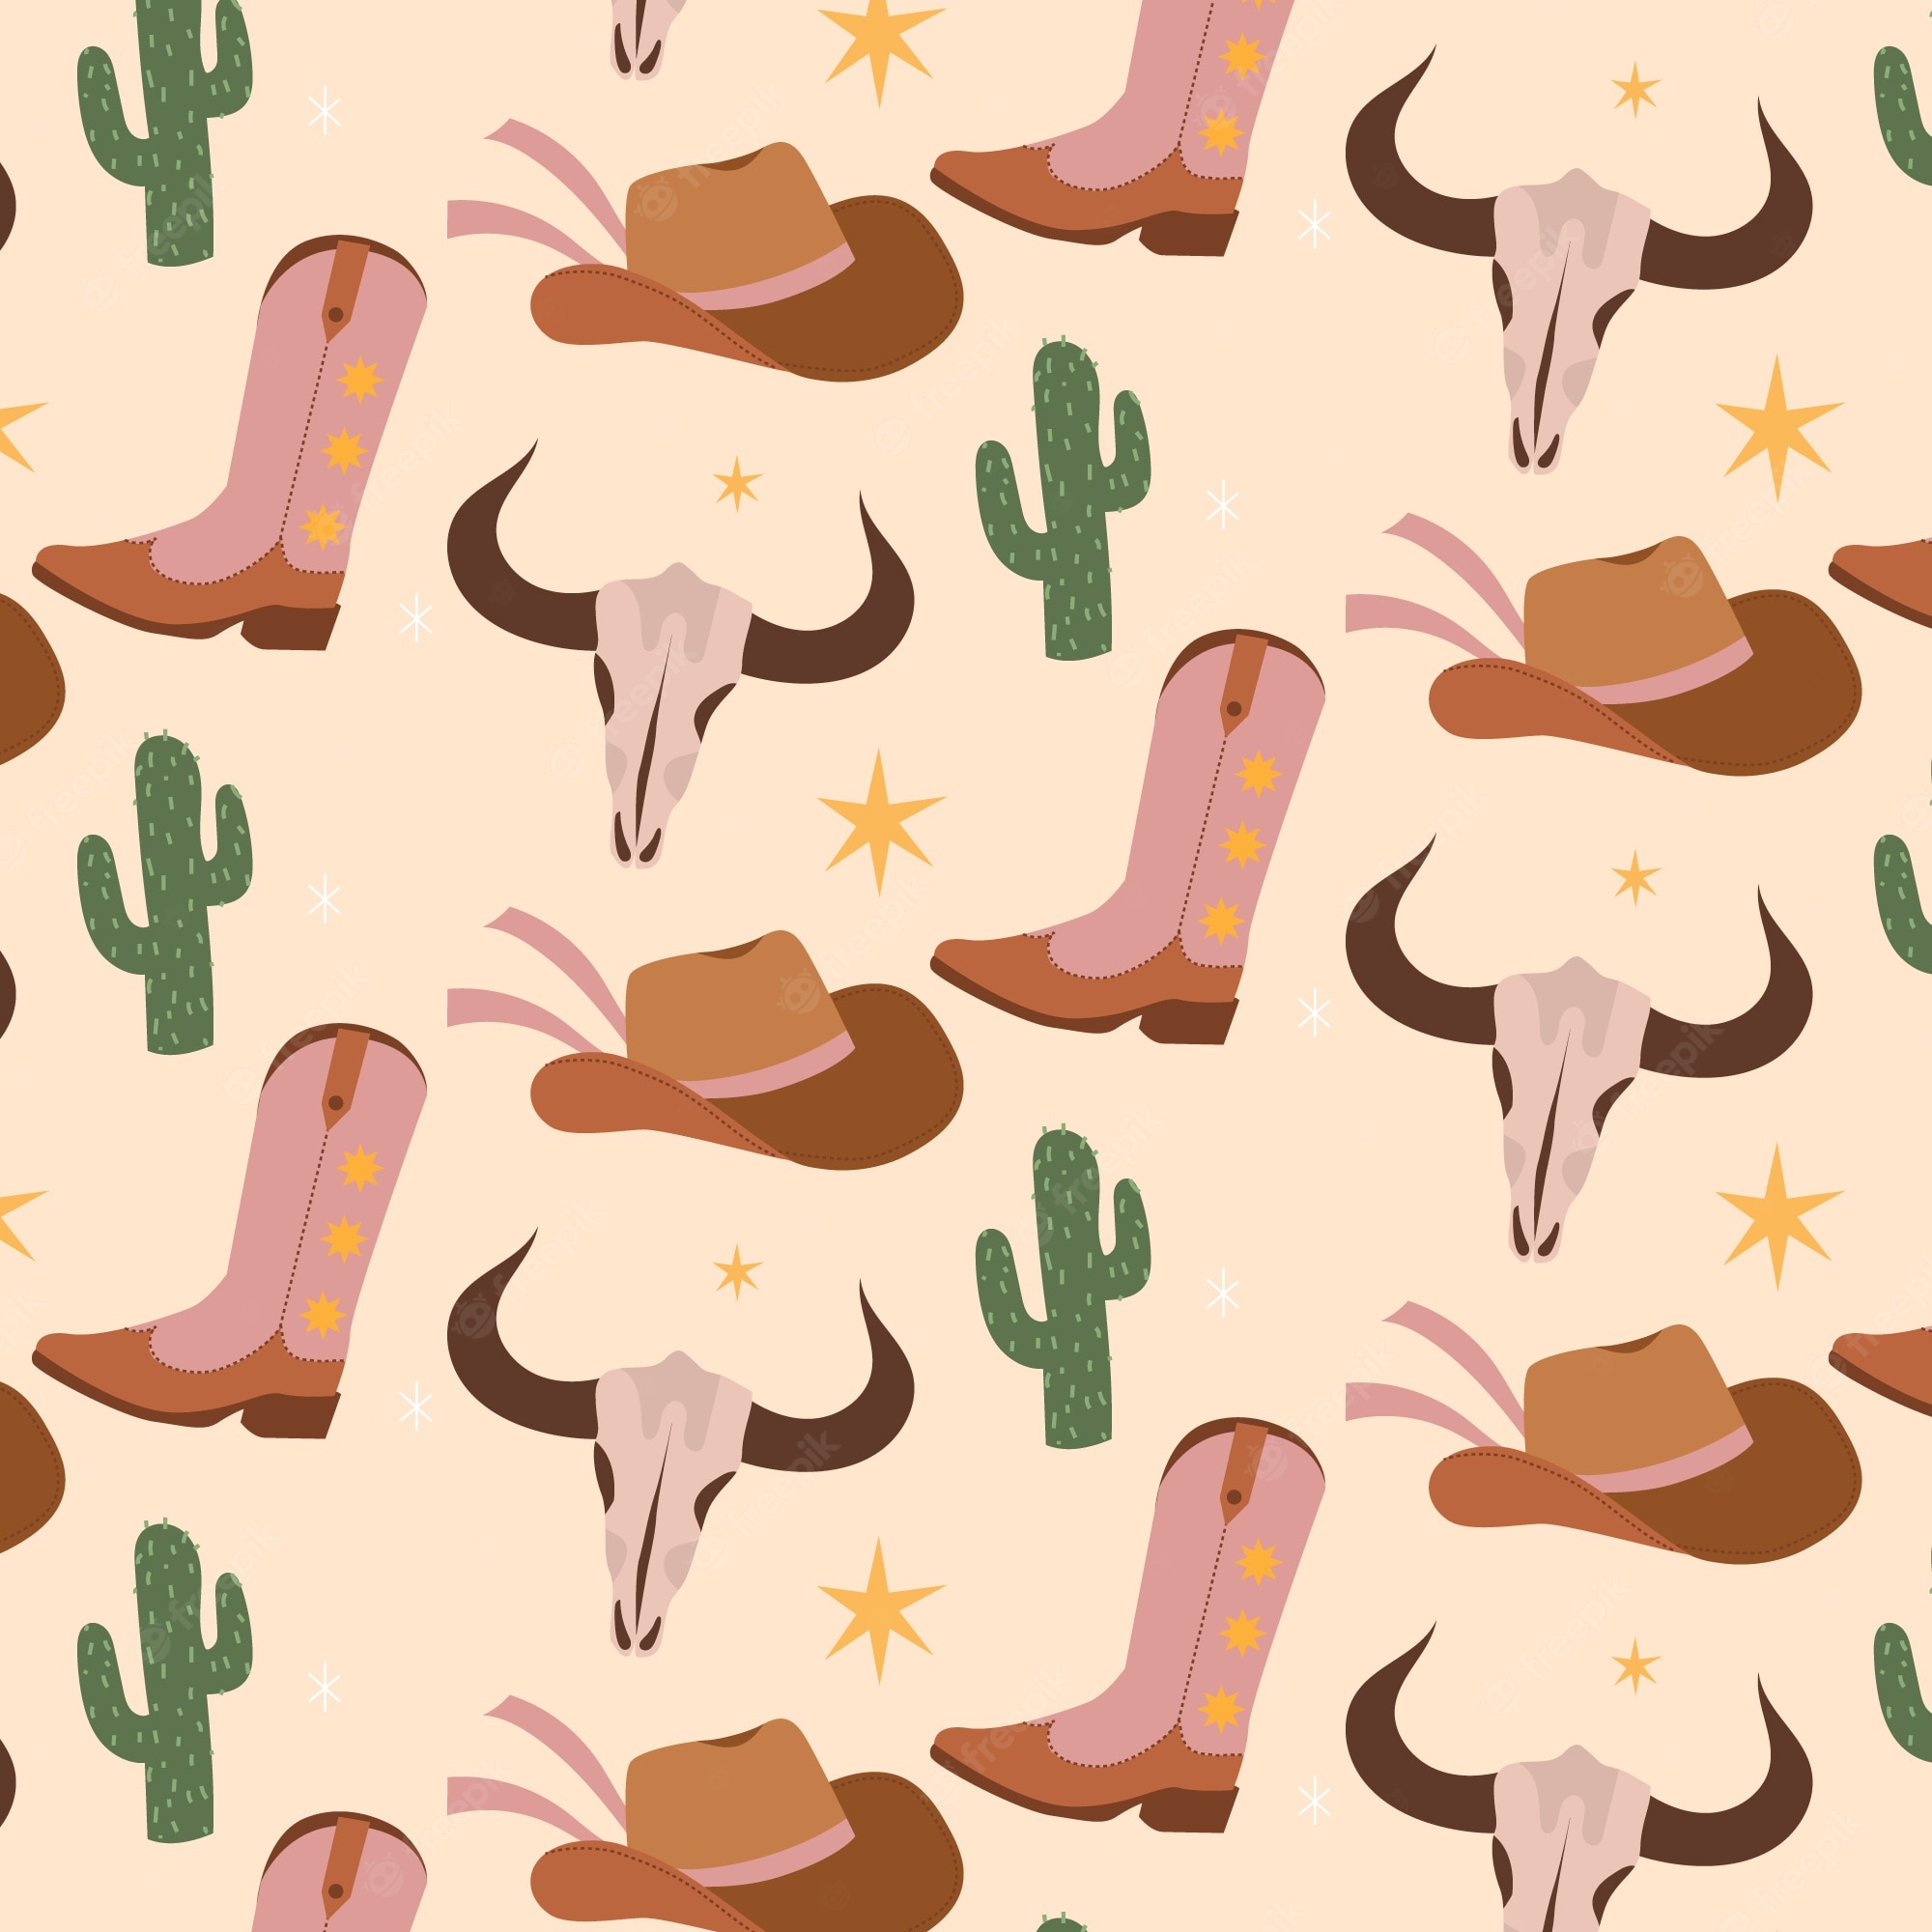 Western pattern Vectors & Illustrations for Free Download